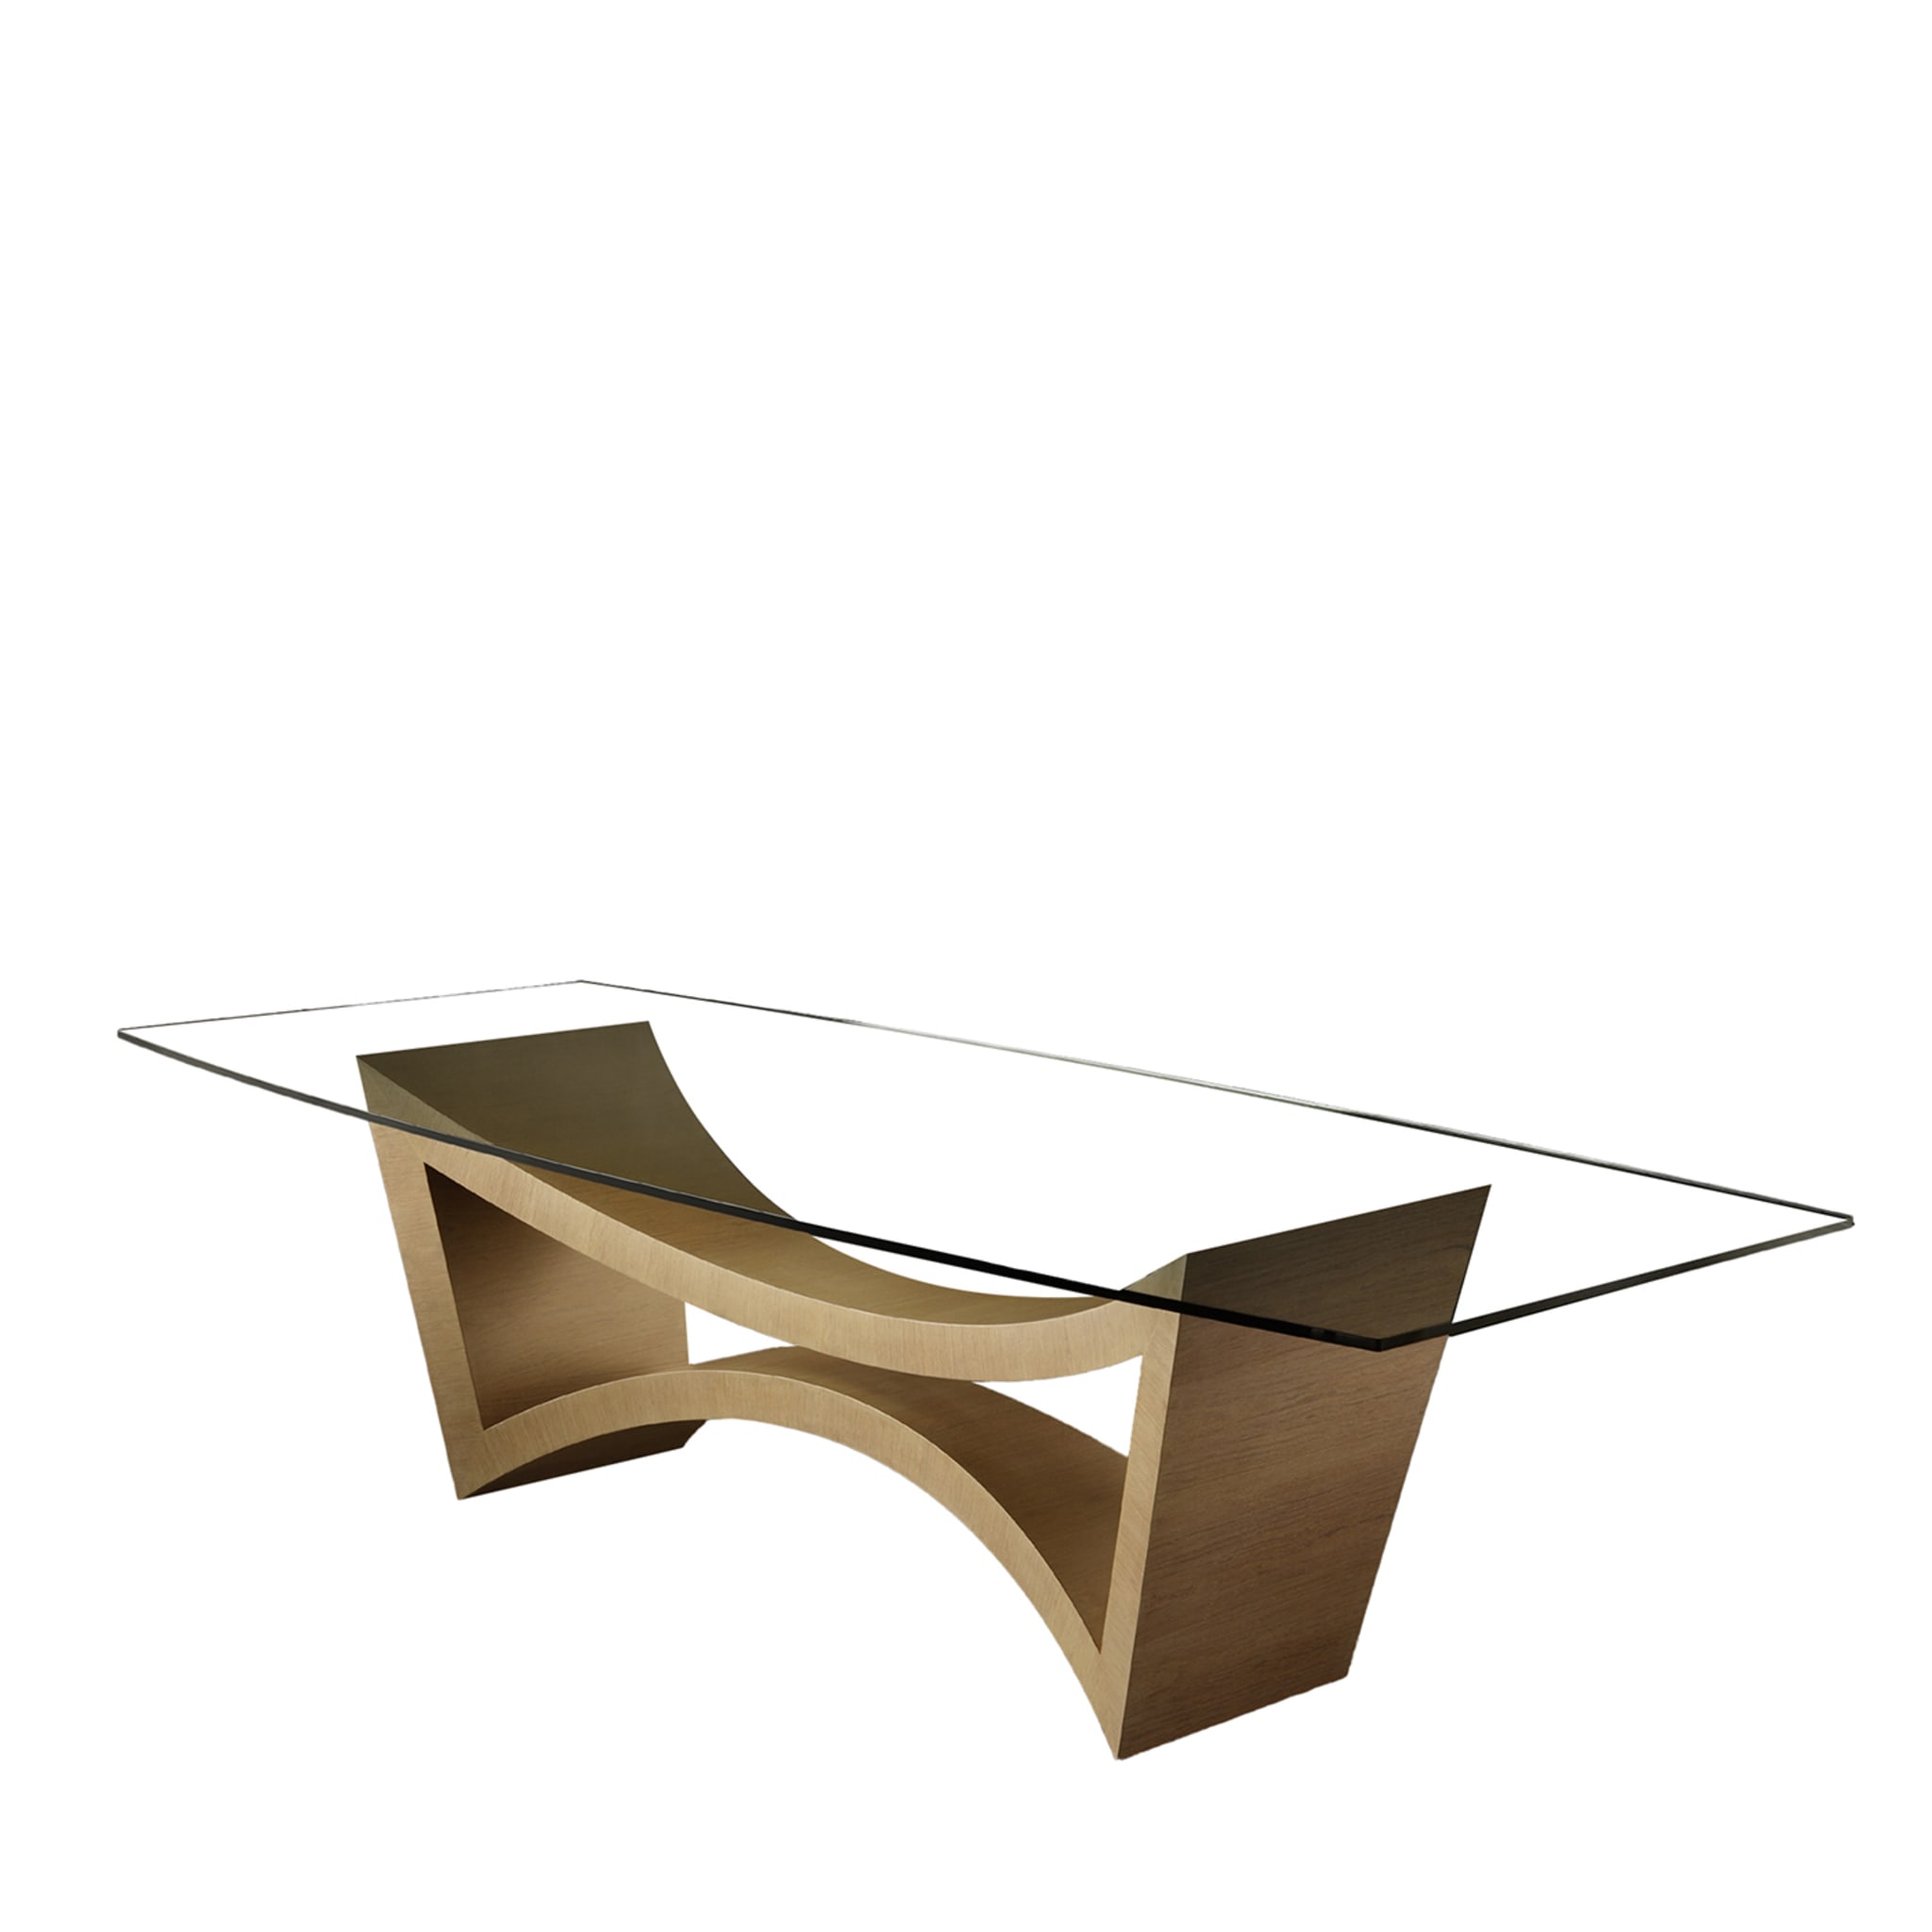 Ipe Tabaco Wood Dining Table - Main view